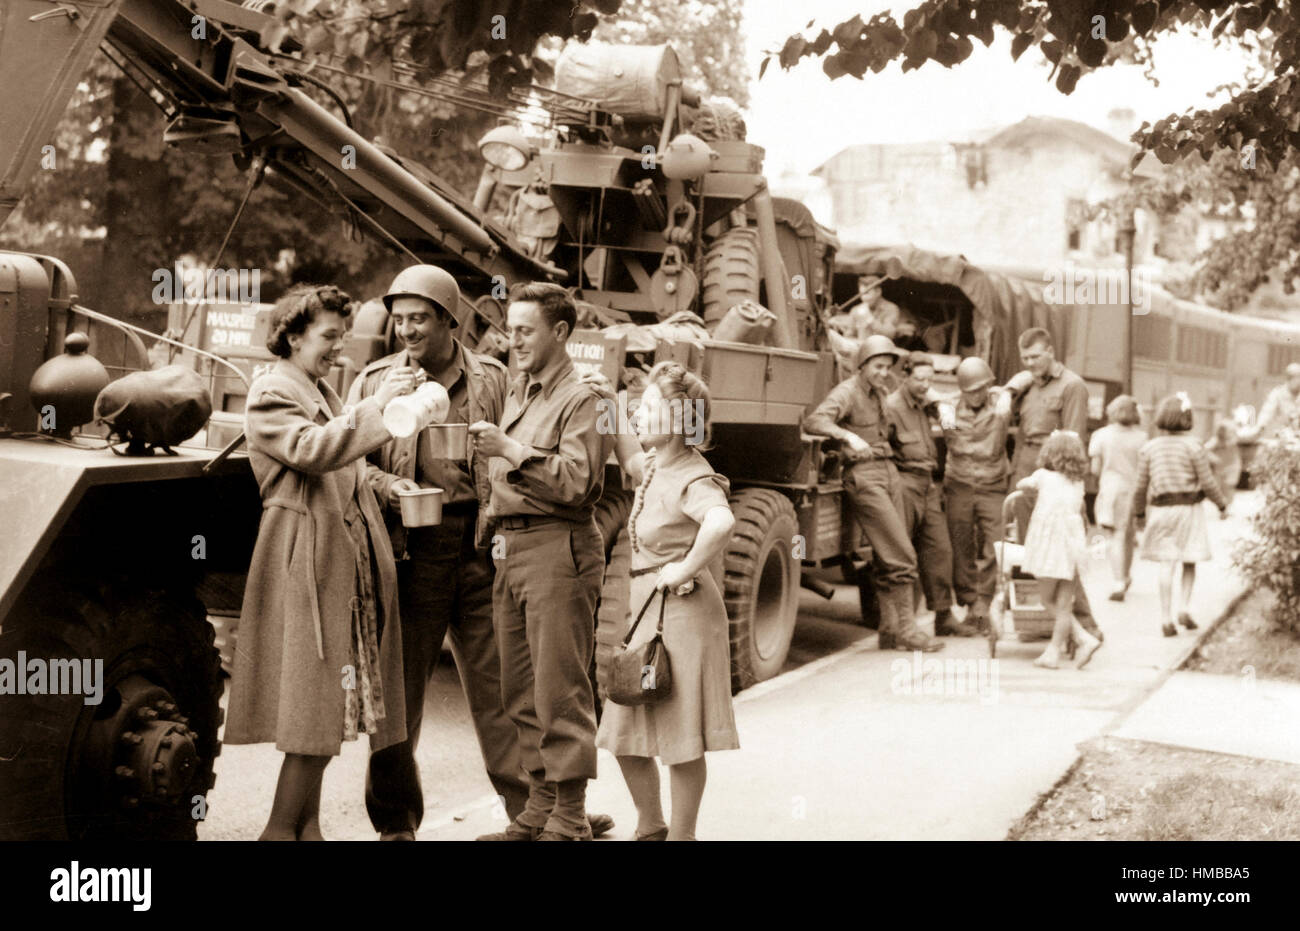 Army Ordnance men await the 'go' signal for cross channel trip to France.  British civilians serve hot coffee as the men await the word to move out in an English town.  July 24, 1944. Messerlin. (Army) Exact Date Shot Unknown NARA FILE #:  111-SC-191728 WAR & CONFLICT BOOK #:  1255 Stock Photo